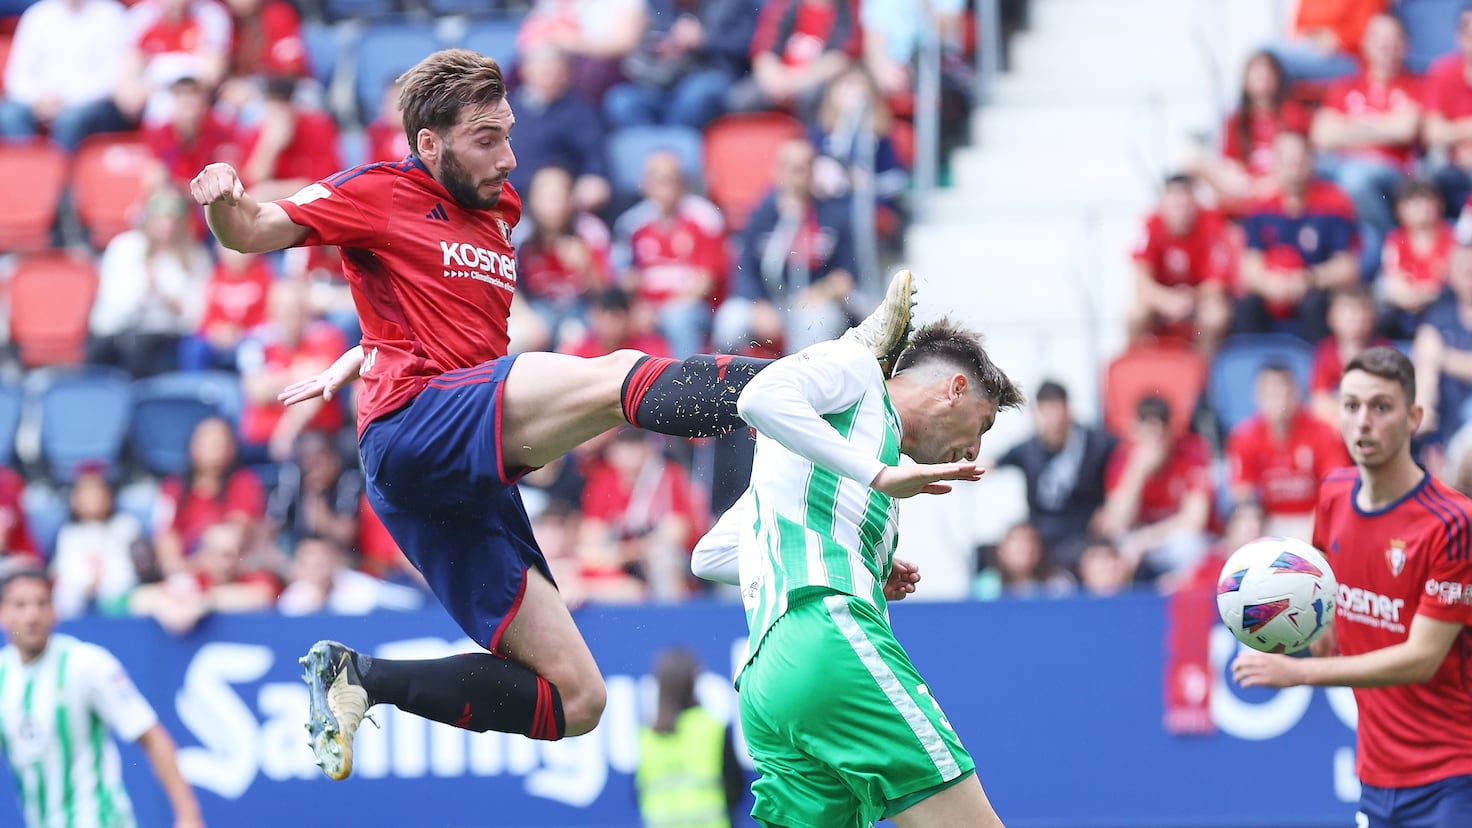 Moncayola's Red Card Incident: A Painful Mistake During Osasuna Clash